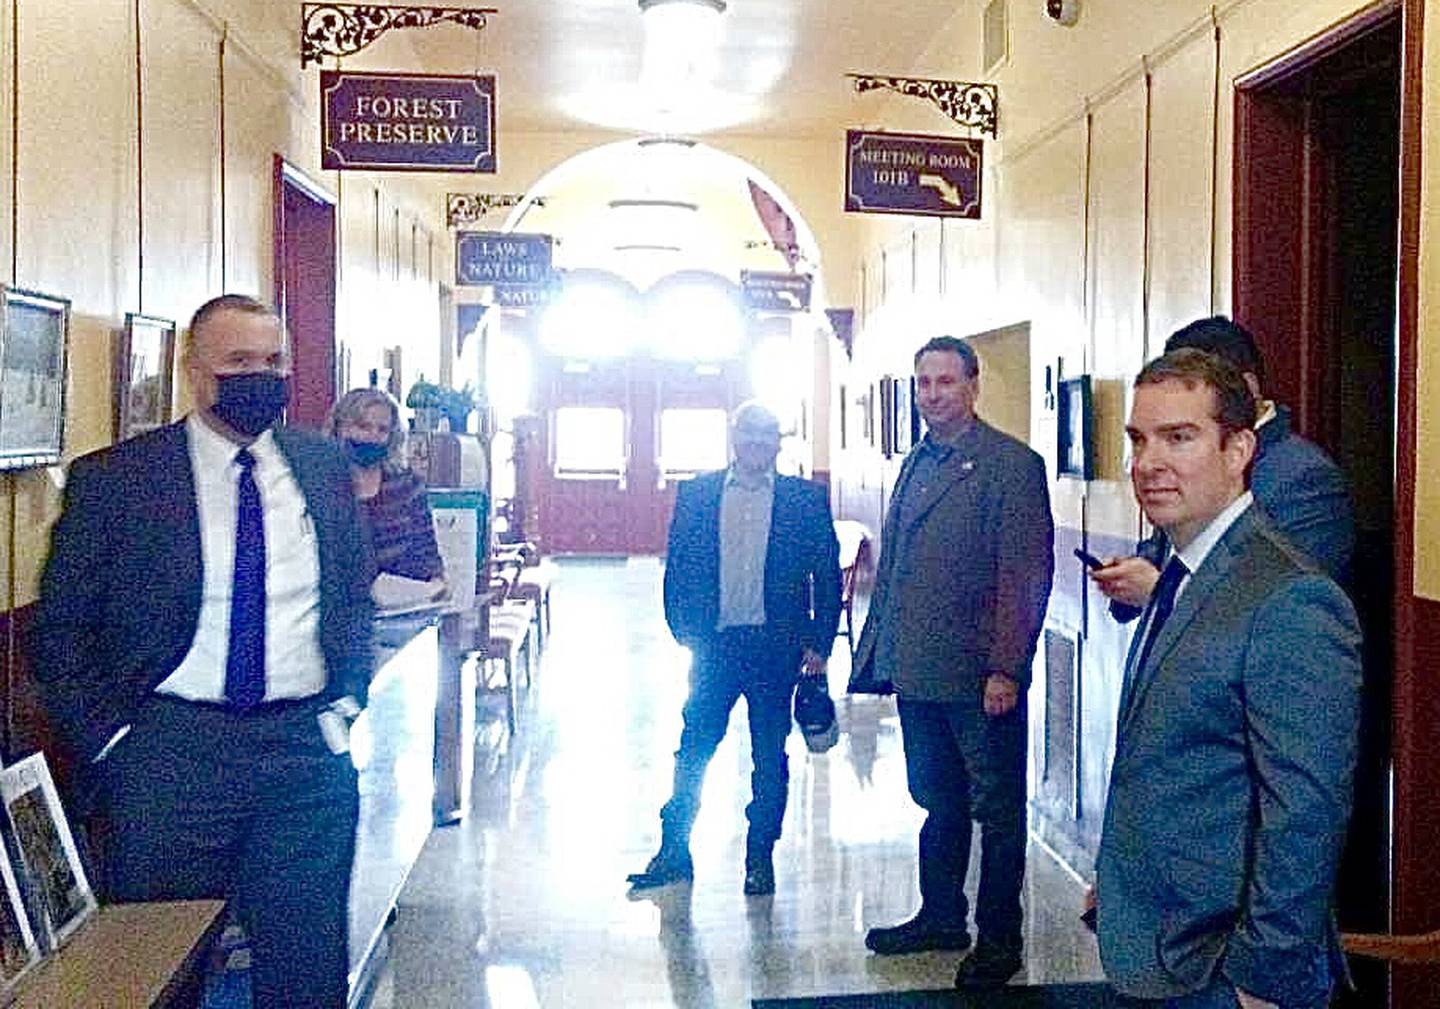 The Kendall County Board started its Jan. 18 meeting in the main corridor of the 1887 Historic Courthouse. Seen here from left is Kendall County State's Attorney Eric Weis, County Clerk Debbie Gillette, county board members Ruben Rodriguez and Dan Koukol and board Chairman Scott Gryder. (Mark Foster - mfoster@shawmedia.com)